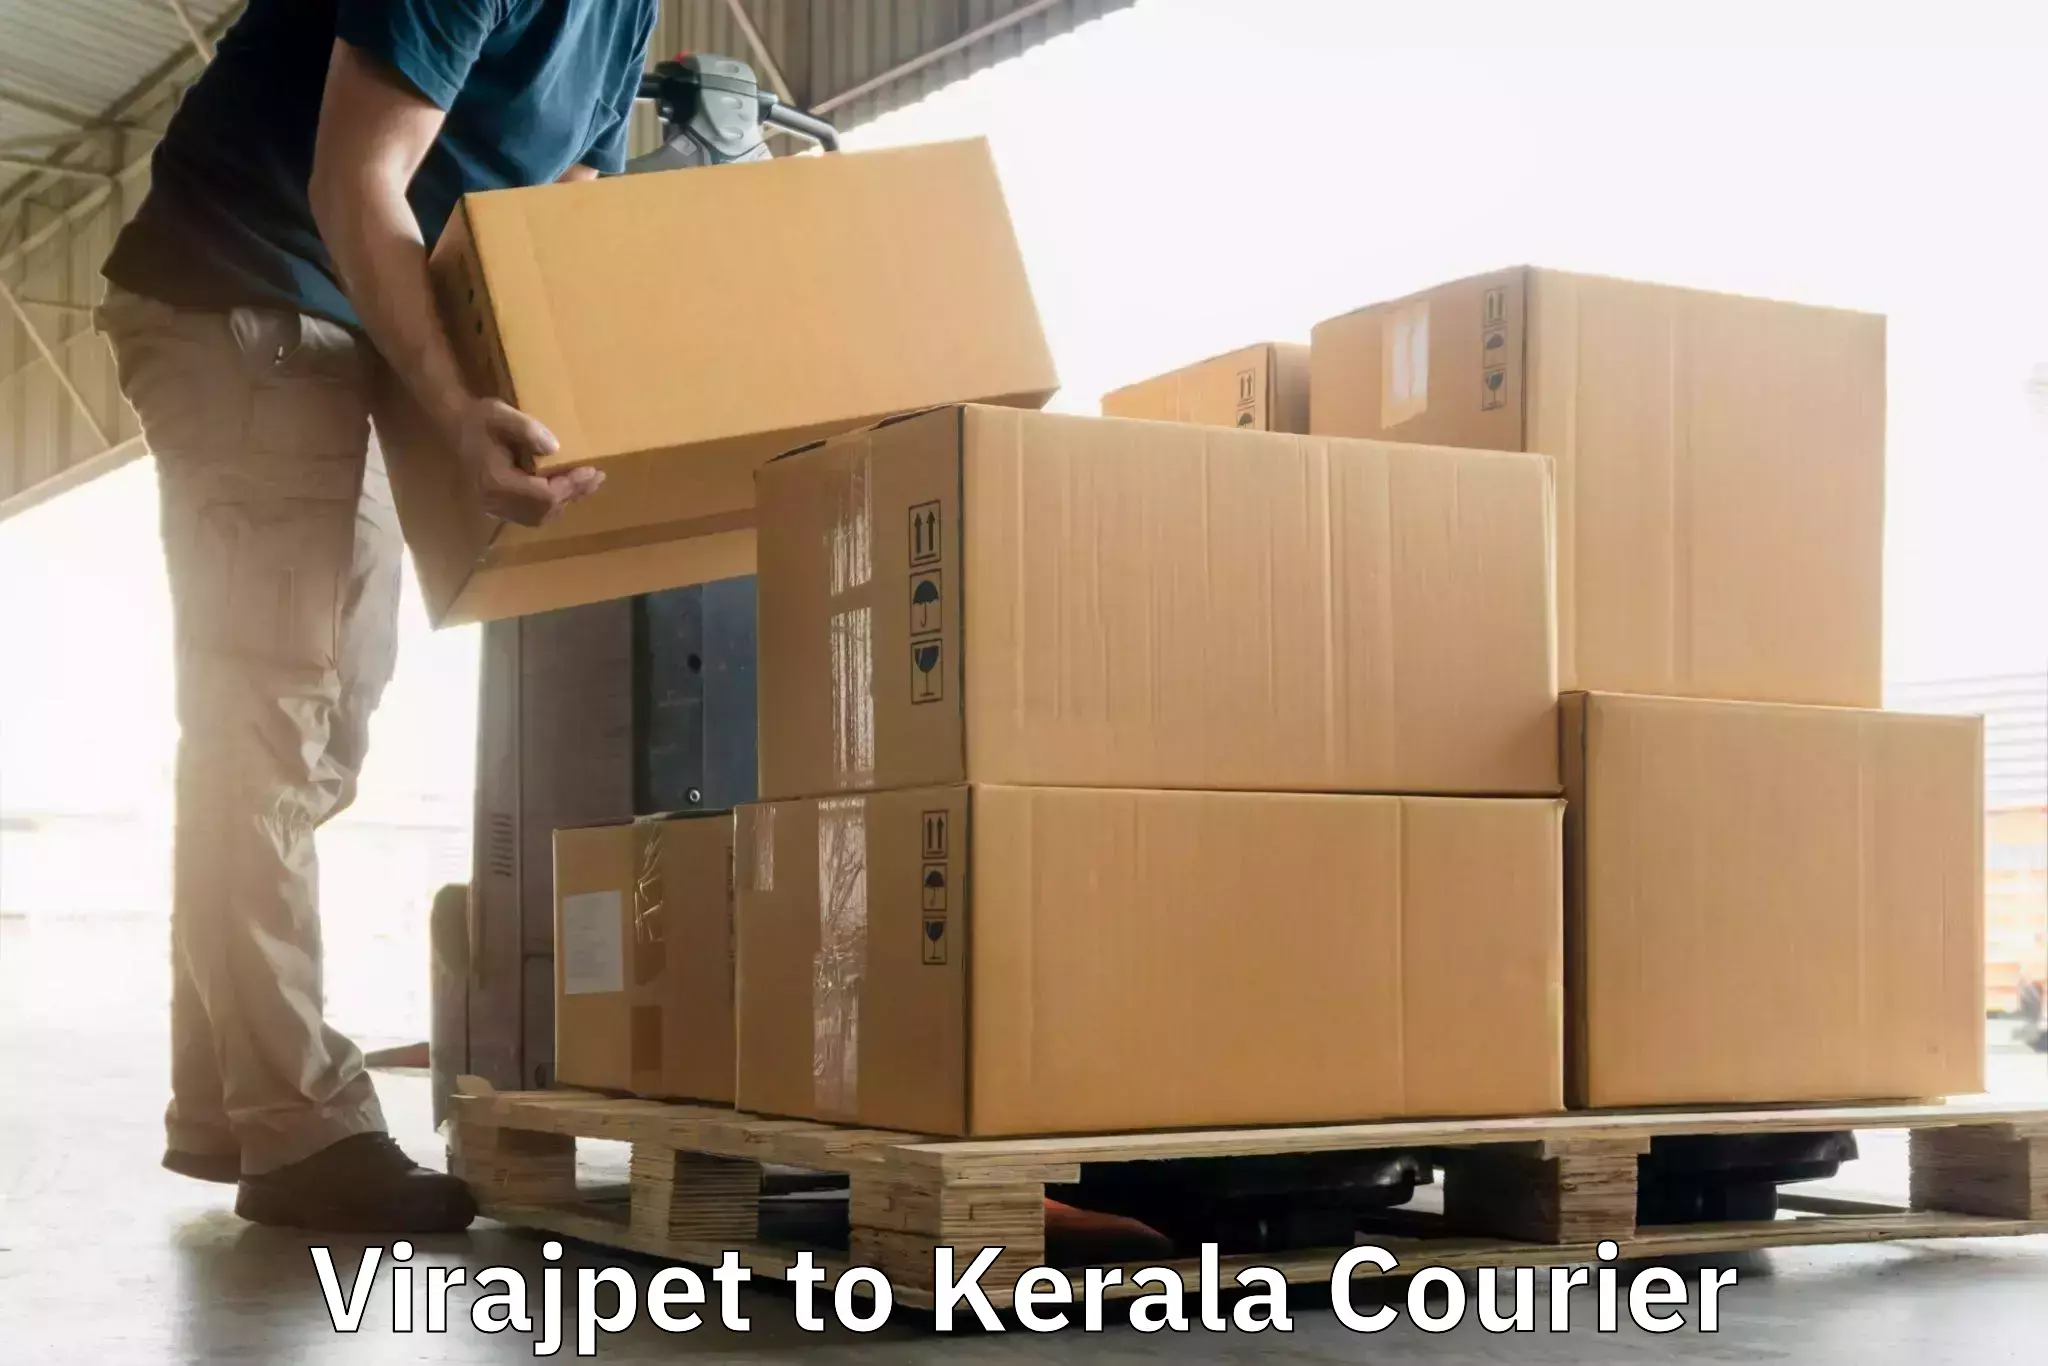 Efficient parcel tracking Virajpet to Pathanamthitta